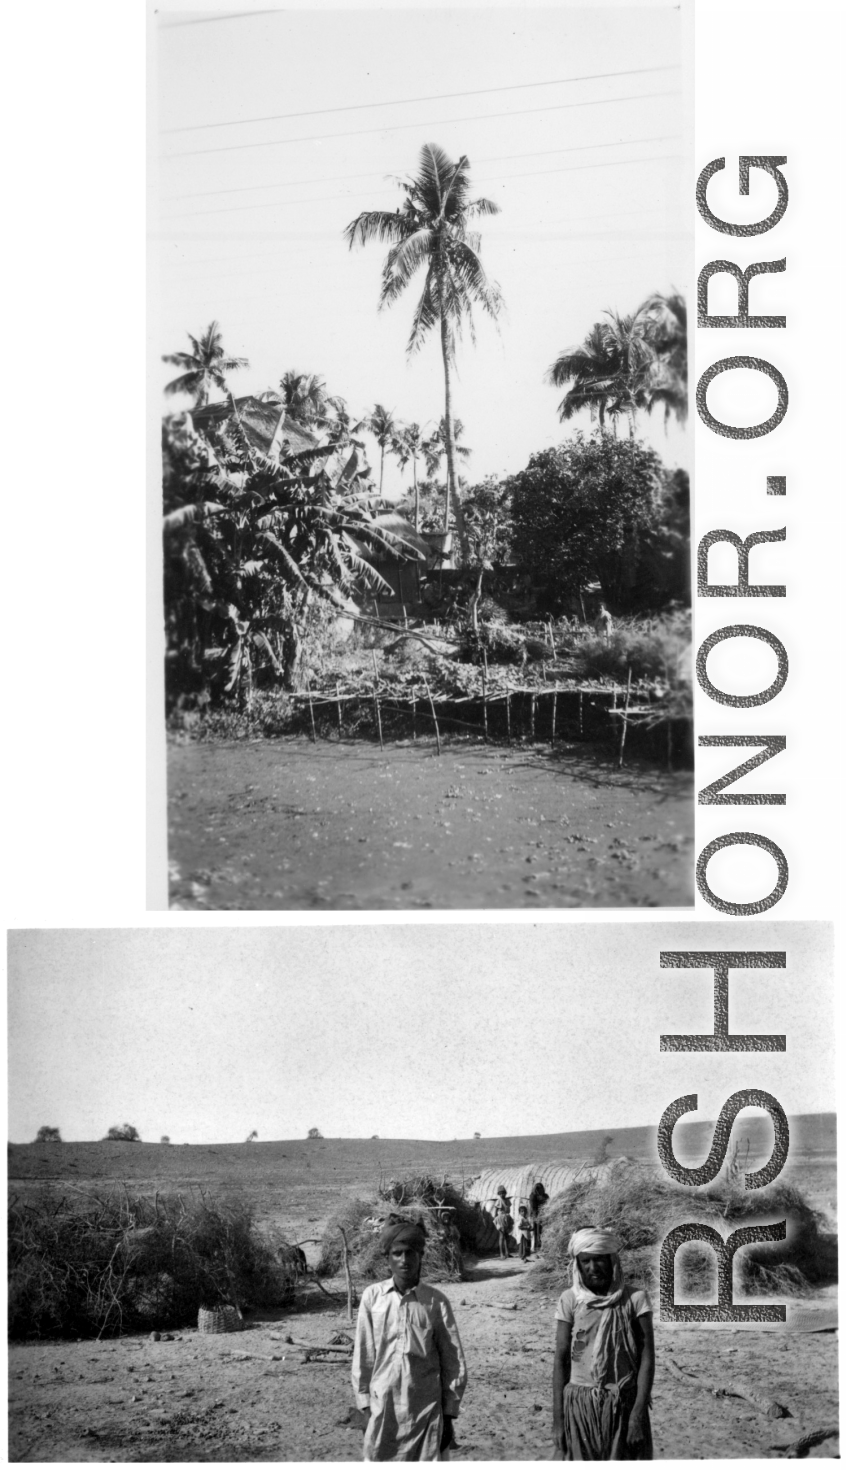 Drying racks for produce (top), and men posing before piled brush (bottom).  Scenes in India witnessed by American GIs during WWII. For many Americans of that era, with their limited experience traveling, the everyday sights and sounds overseas were new, intriguing, and photo worthy.